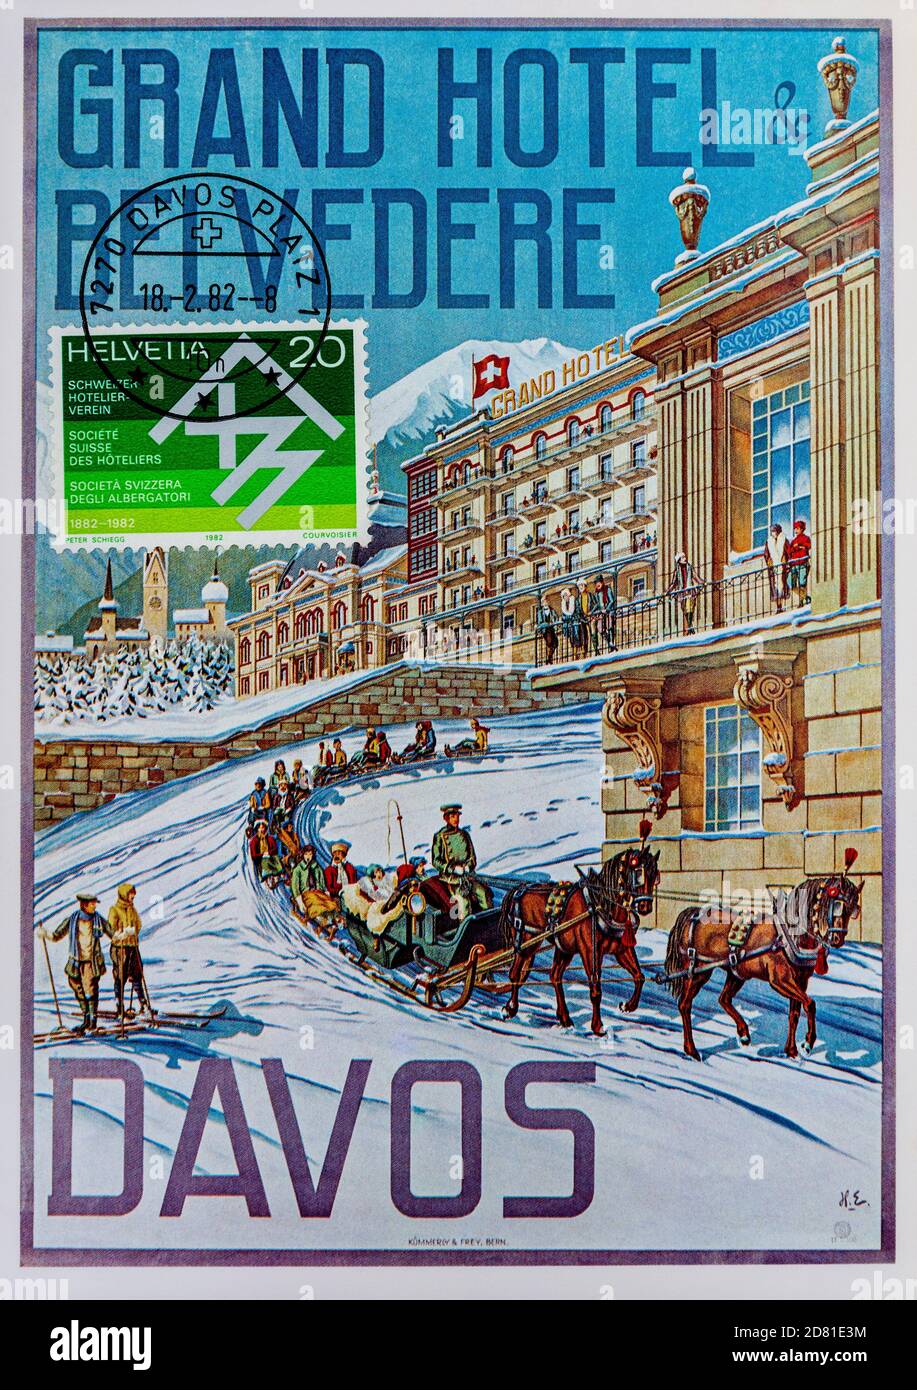 1982 mailed Swiss postcard illustrating a 1905 publicity poster for the Grand Hotel Belvedere, Davos, Switzerland. Stock Photo